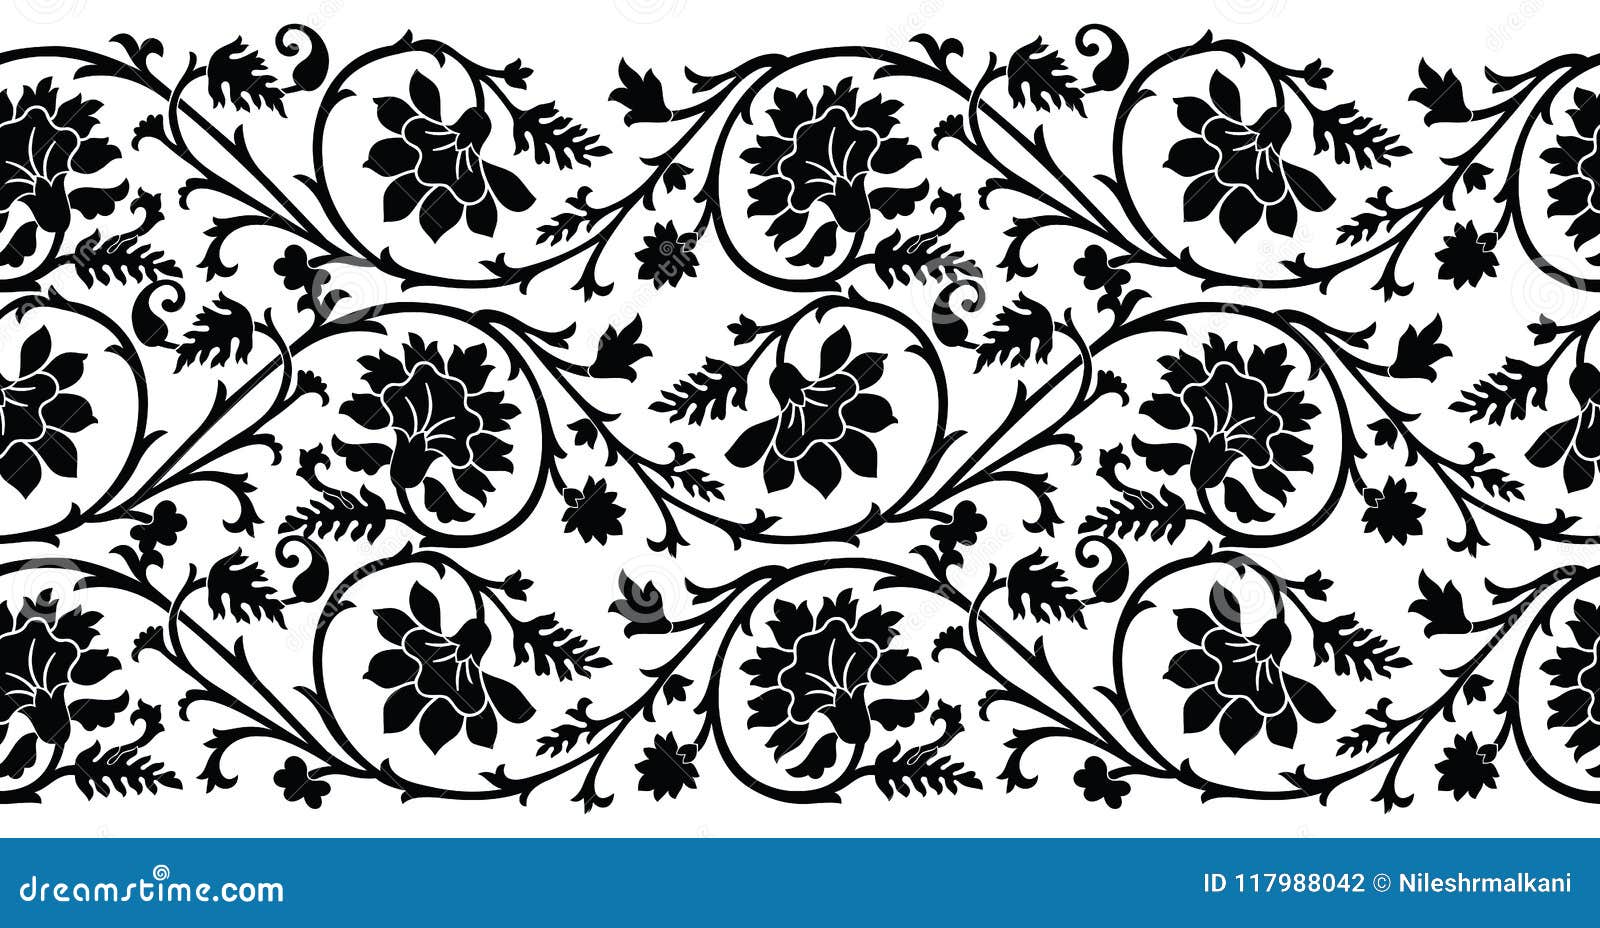 Featured image of post Flower Black And White Textile Design - Illustration about black and white pattern.